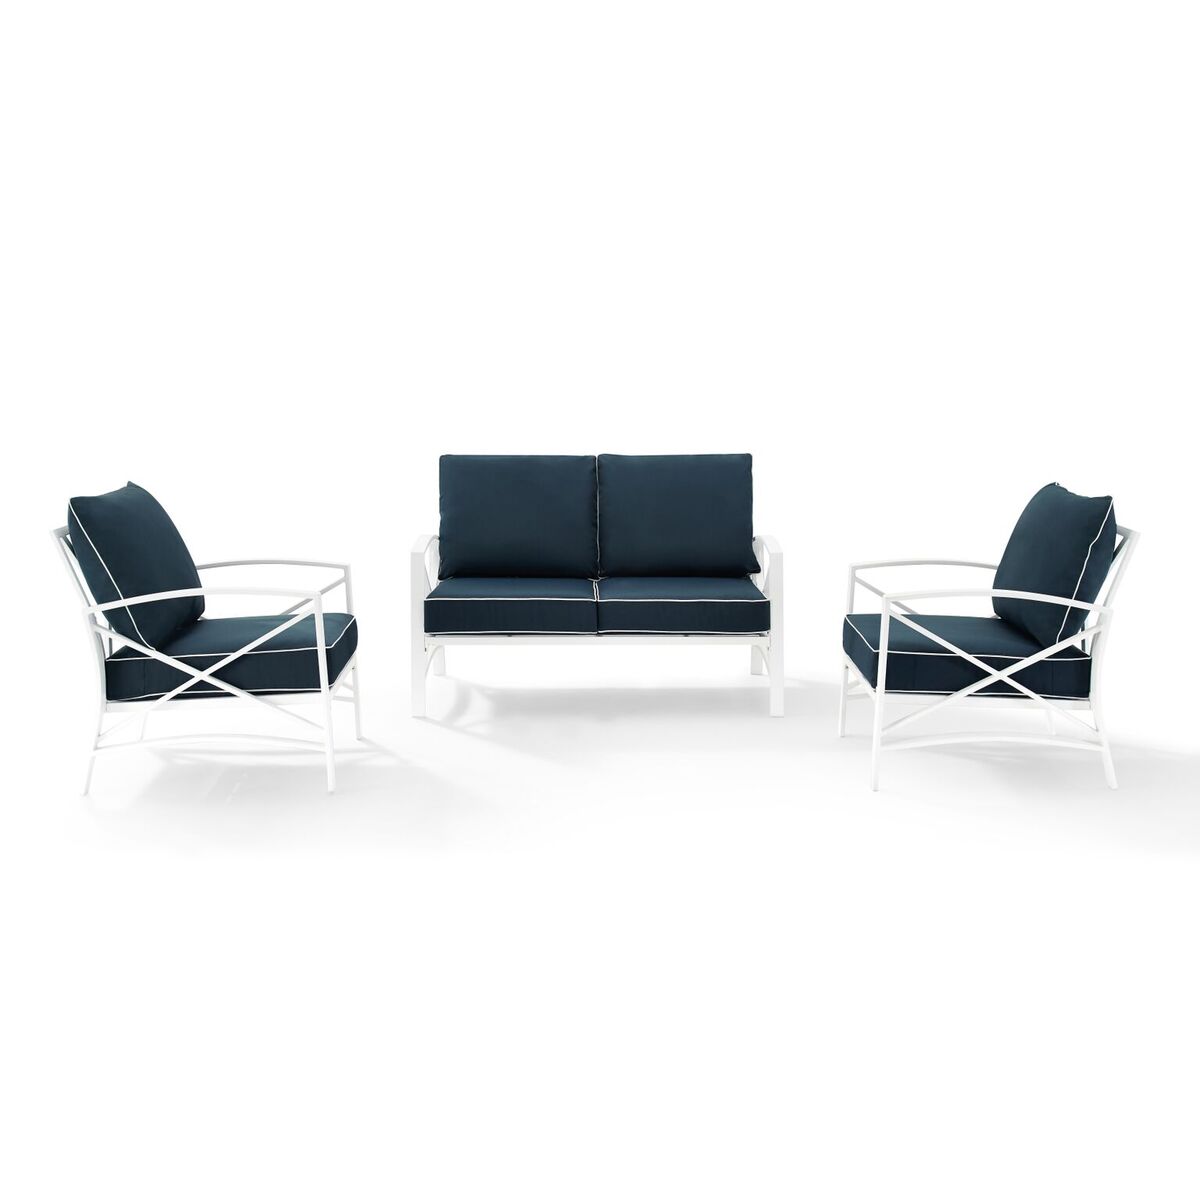 Ko60011wh-nv Kaplan 3-piece Outdoor Seating Set In White With Navy Cushions